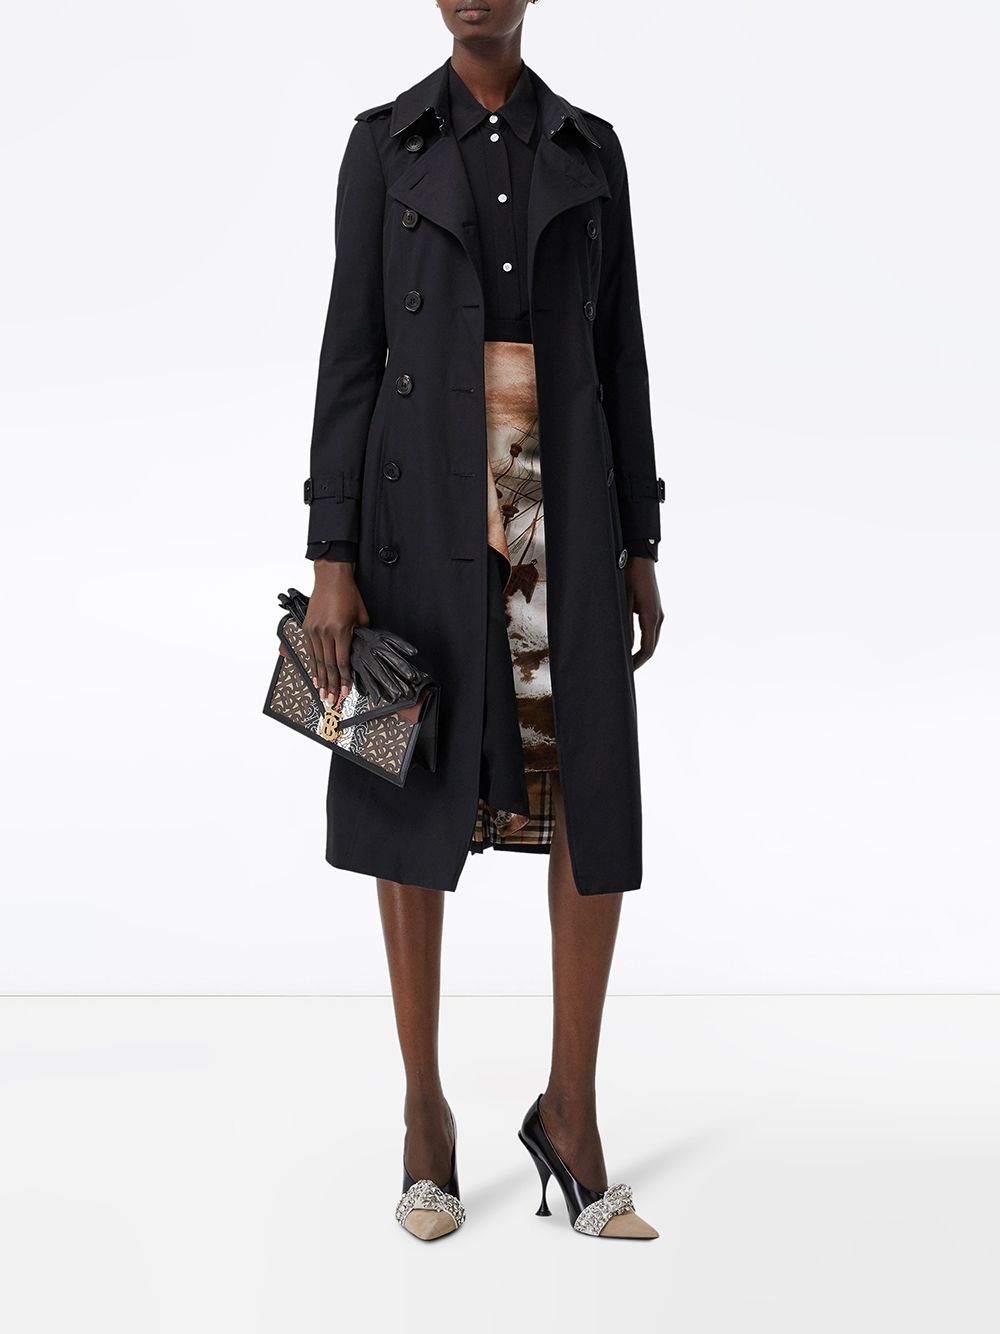 Burberry The Long Chelsea Heritage Trench Coat - Farfetch